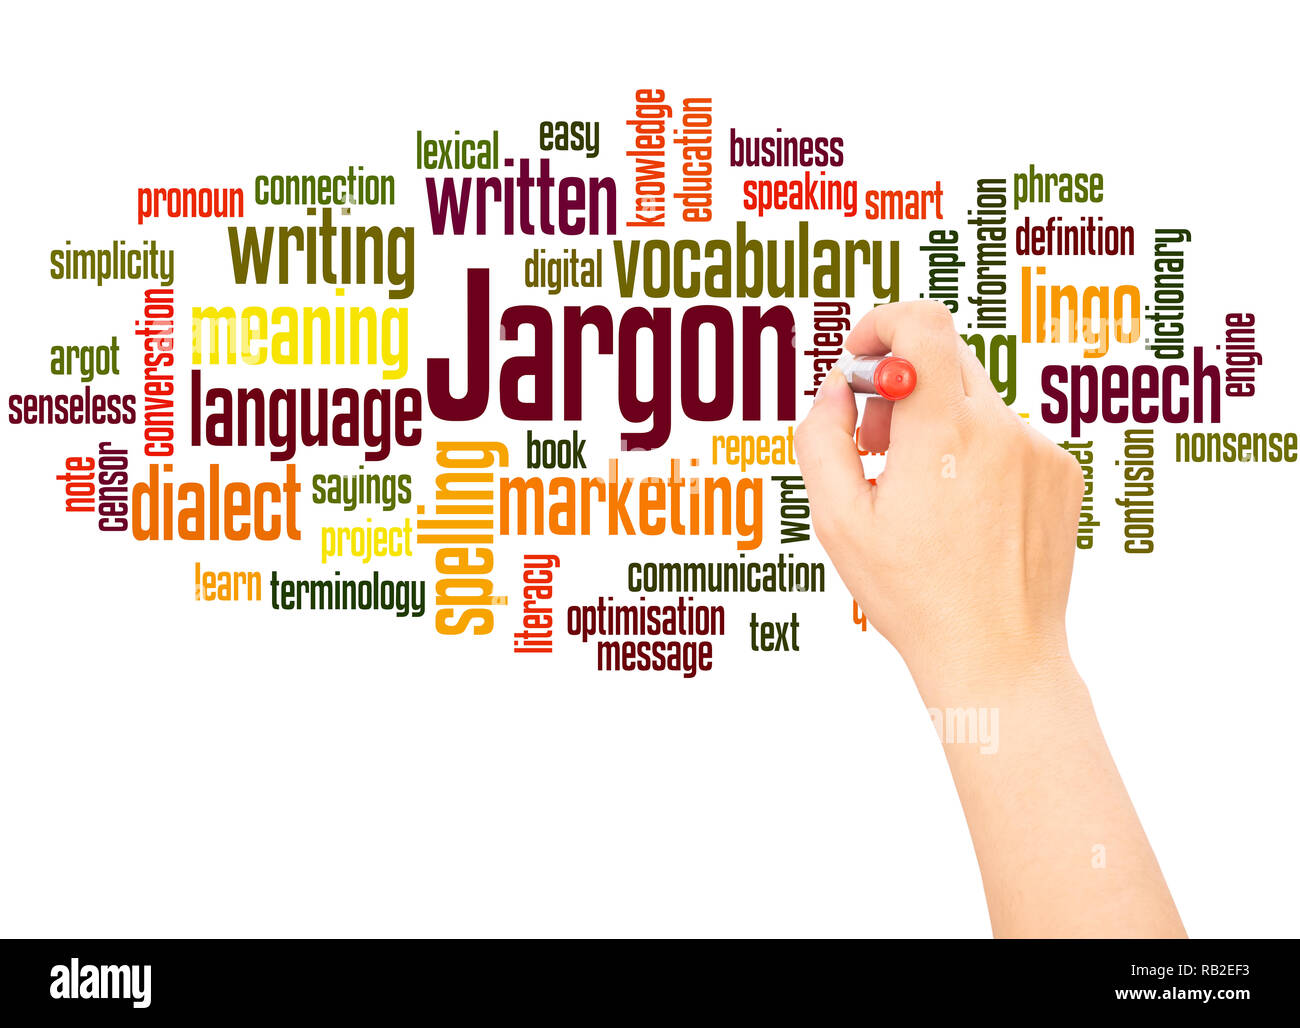 Jargon word cloud hand writing concept on white background. Stock Photo